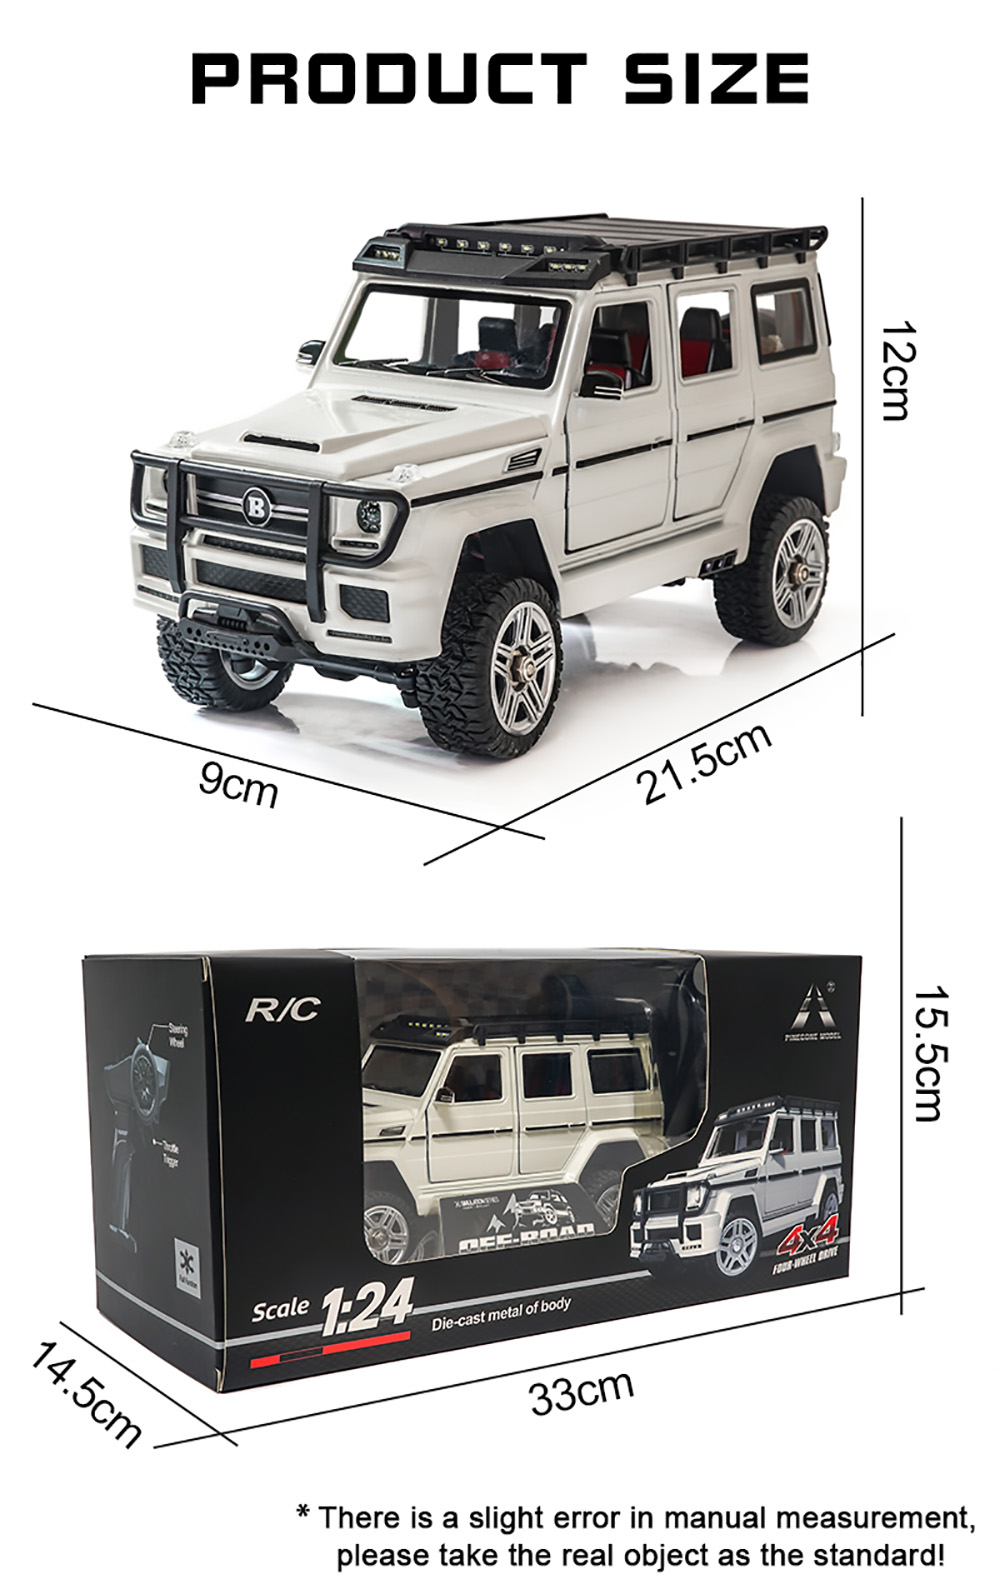 SG Pine Forest 2401 RTR 1/24 2.4G 4WD RC Car Mini Crawler LED Light Alloy Shell Off-Road Truck - White